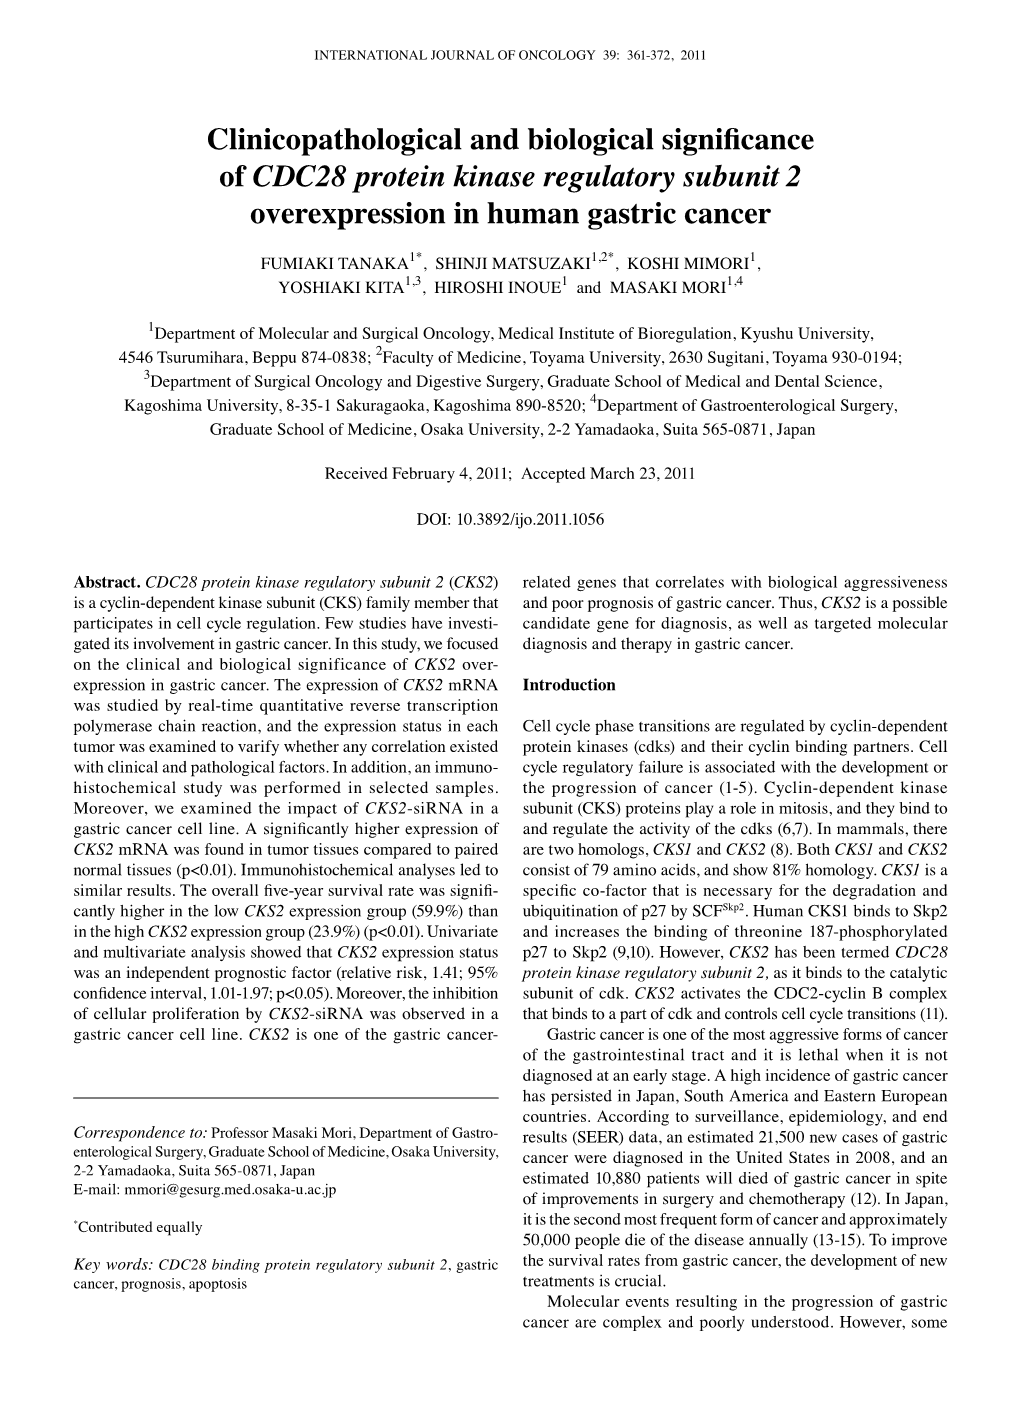 Clinicopathological and Biological Significance of CDC28 Protein Kinase Regulatory Subunit 2 Overexpression in Human Gastric Cancer